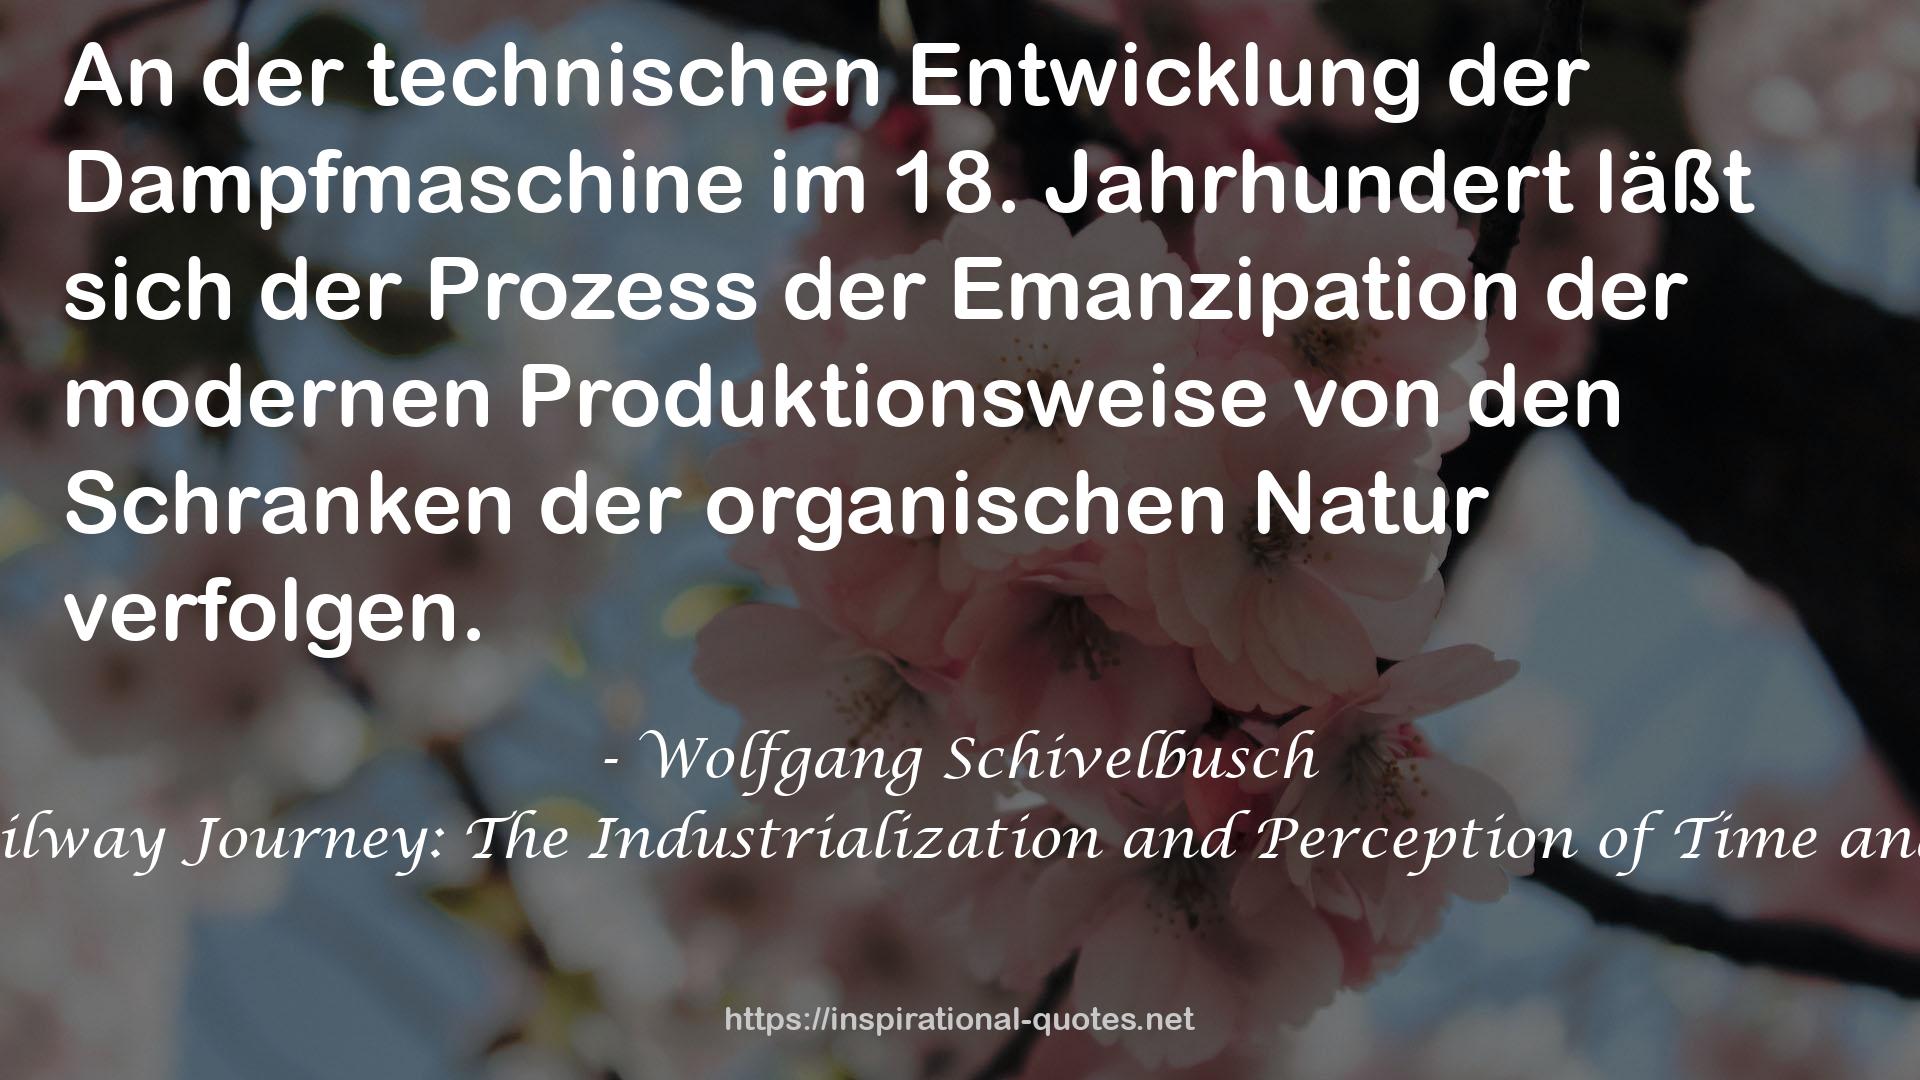 Wolfgang Schivelbusch QUOTES